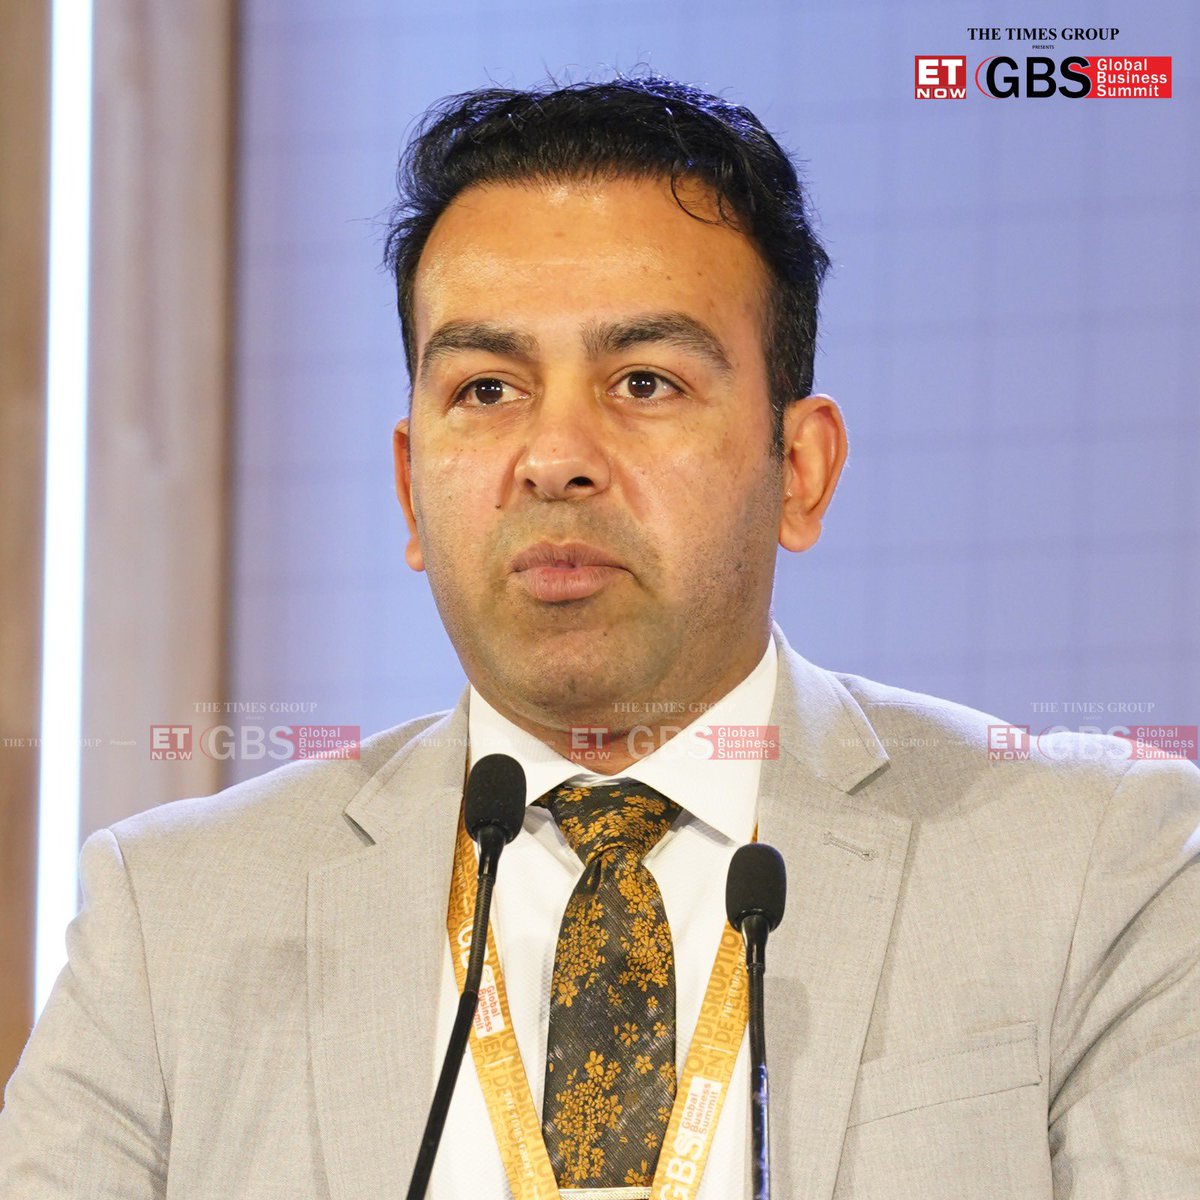 'India has long been a nation I've admired. With age, I've come to understand India's increasing significance in the ever-changing global power dynamics.' said Safi Rauf, Afghan American Humanitarian and Navy reservist.